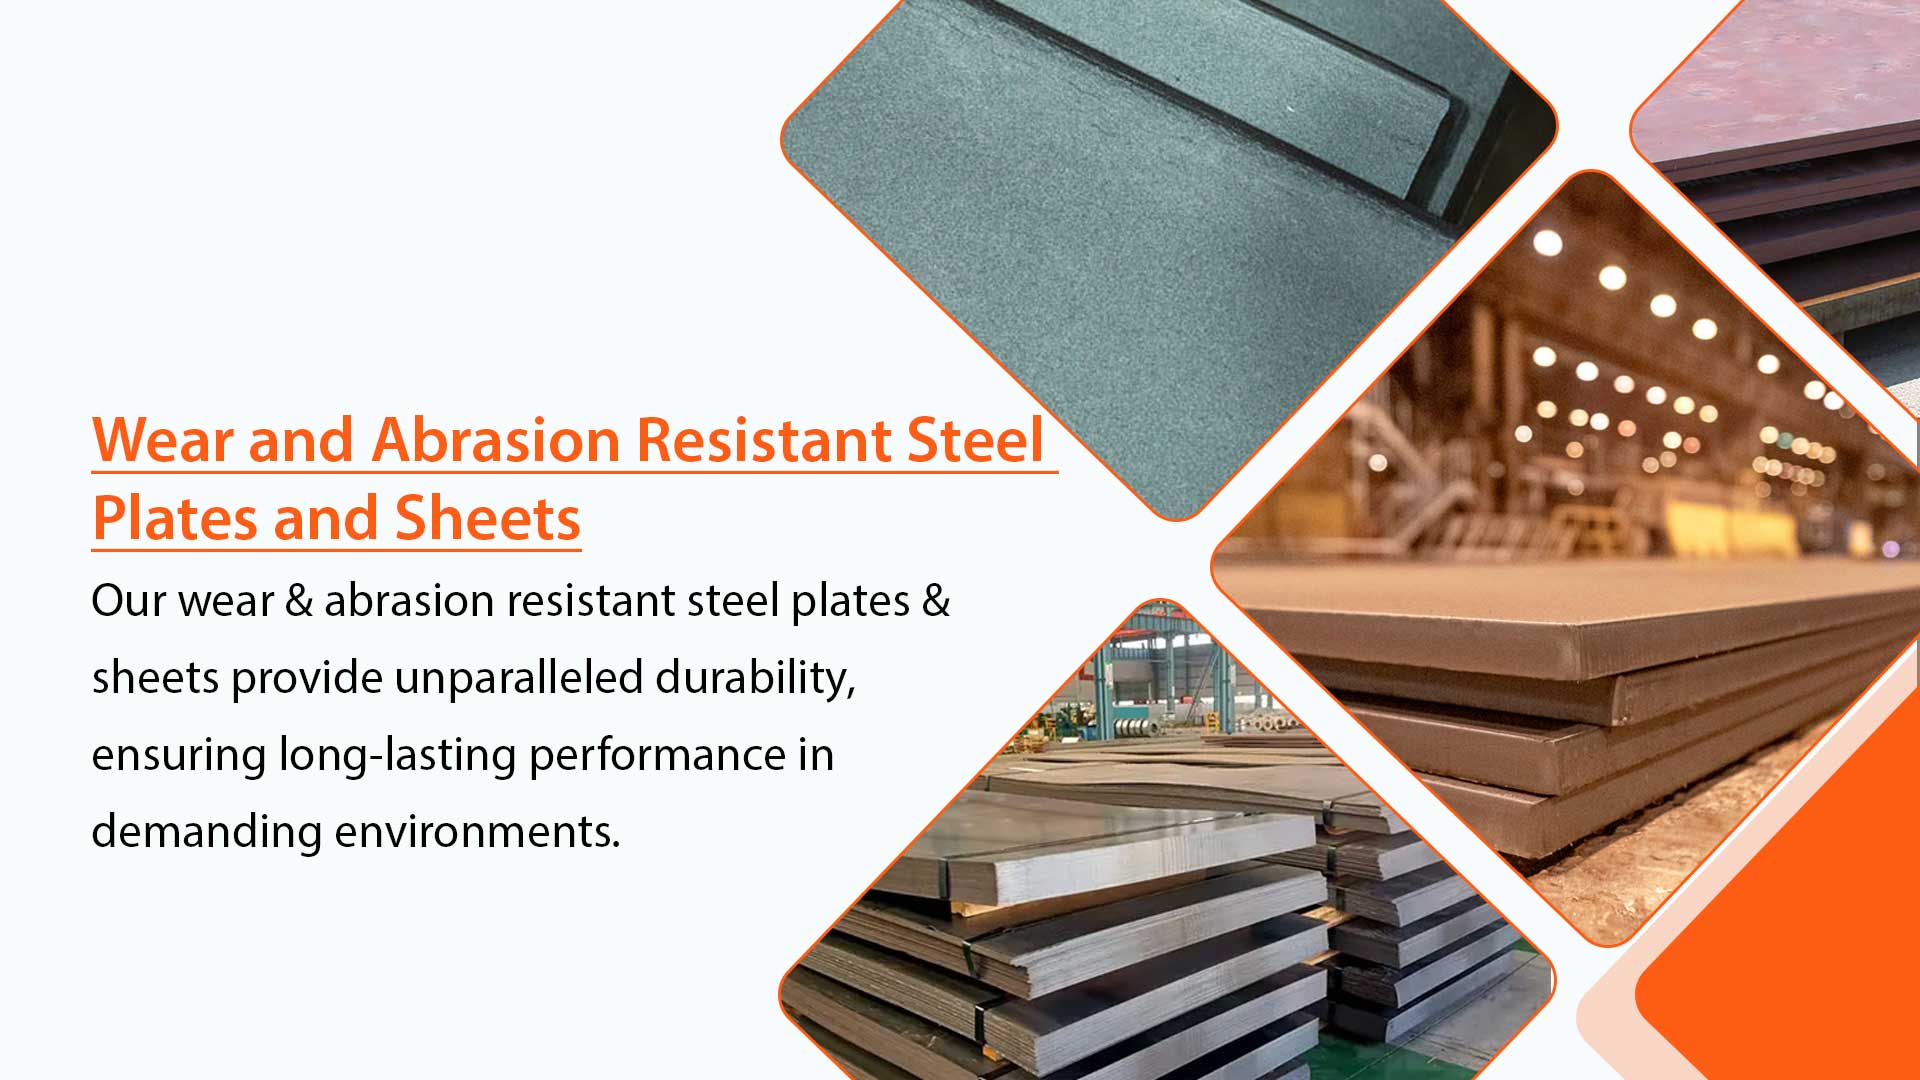 Wear and Abrasion Resistant Steel Plates and Sheets in Bolivia